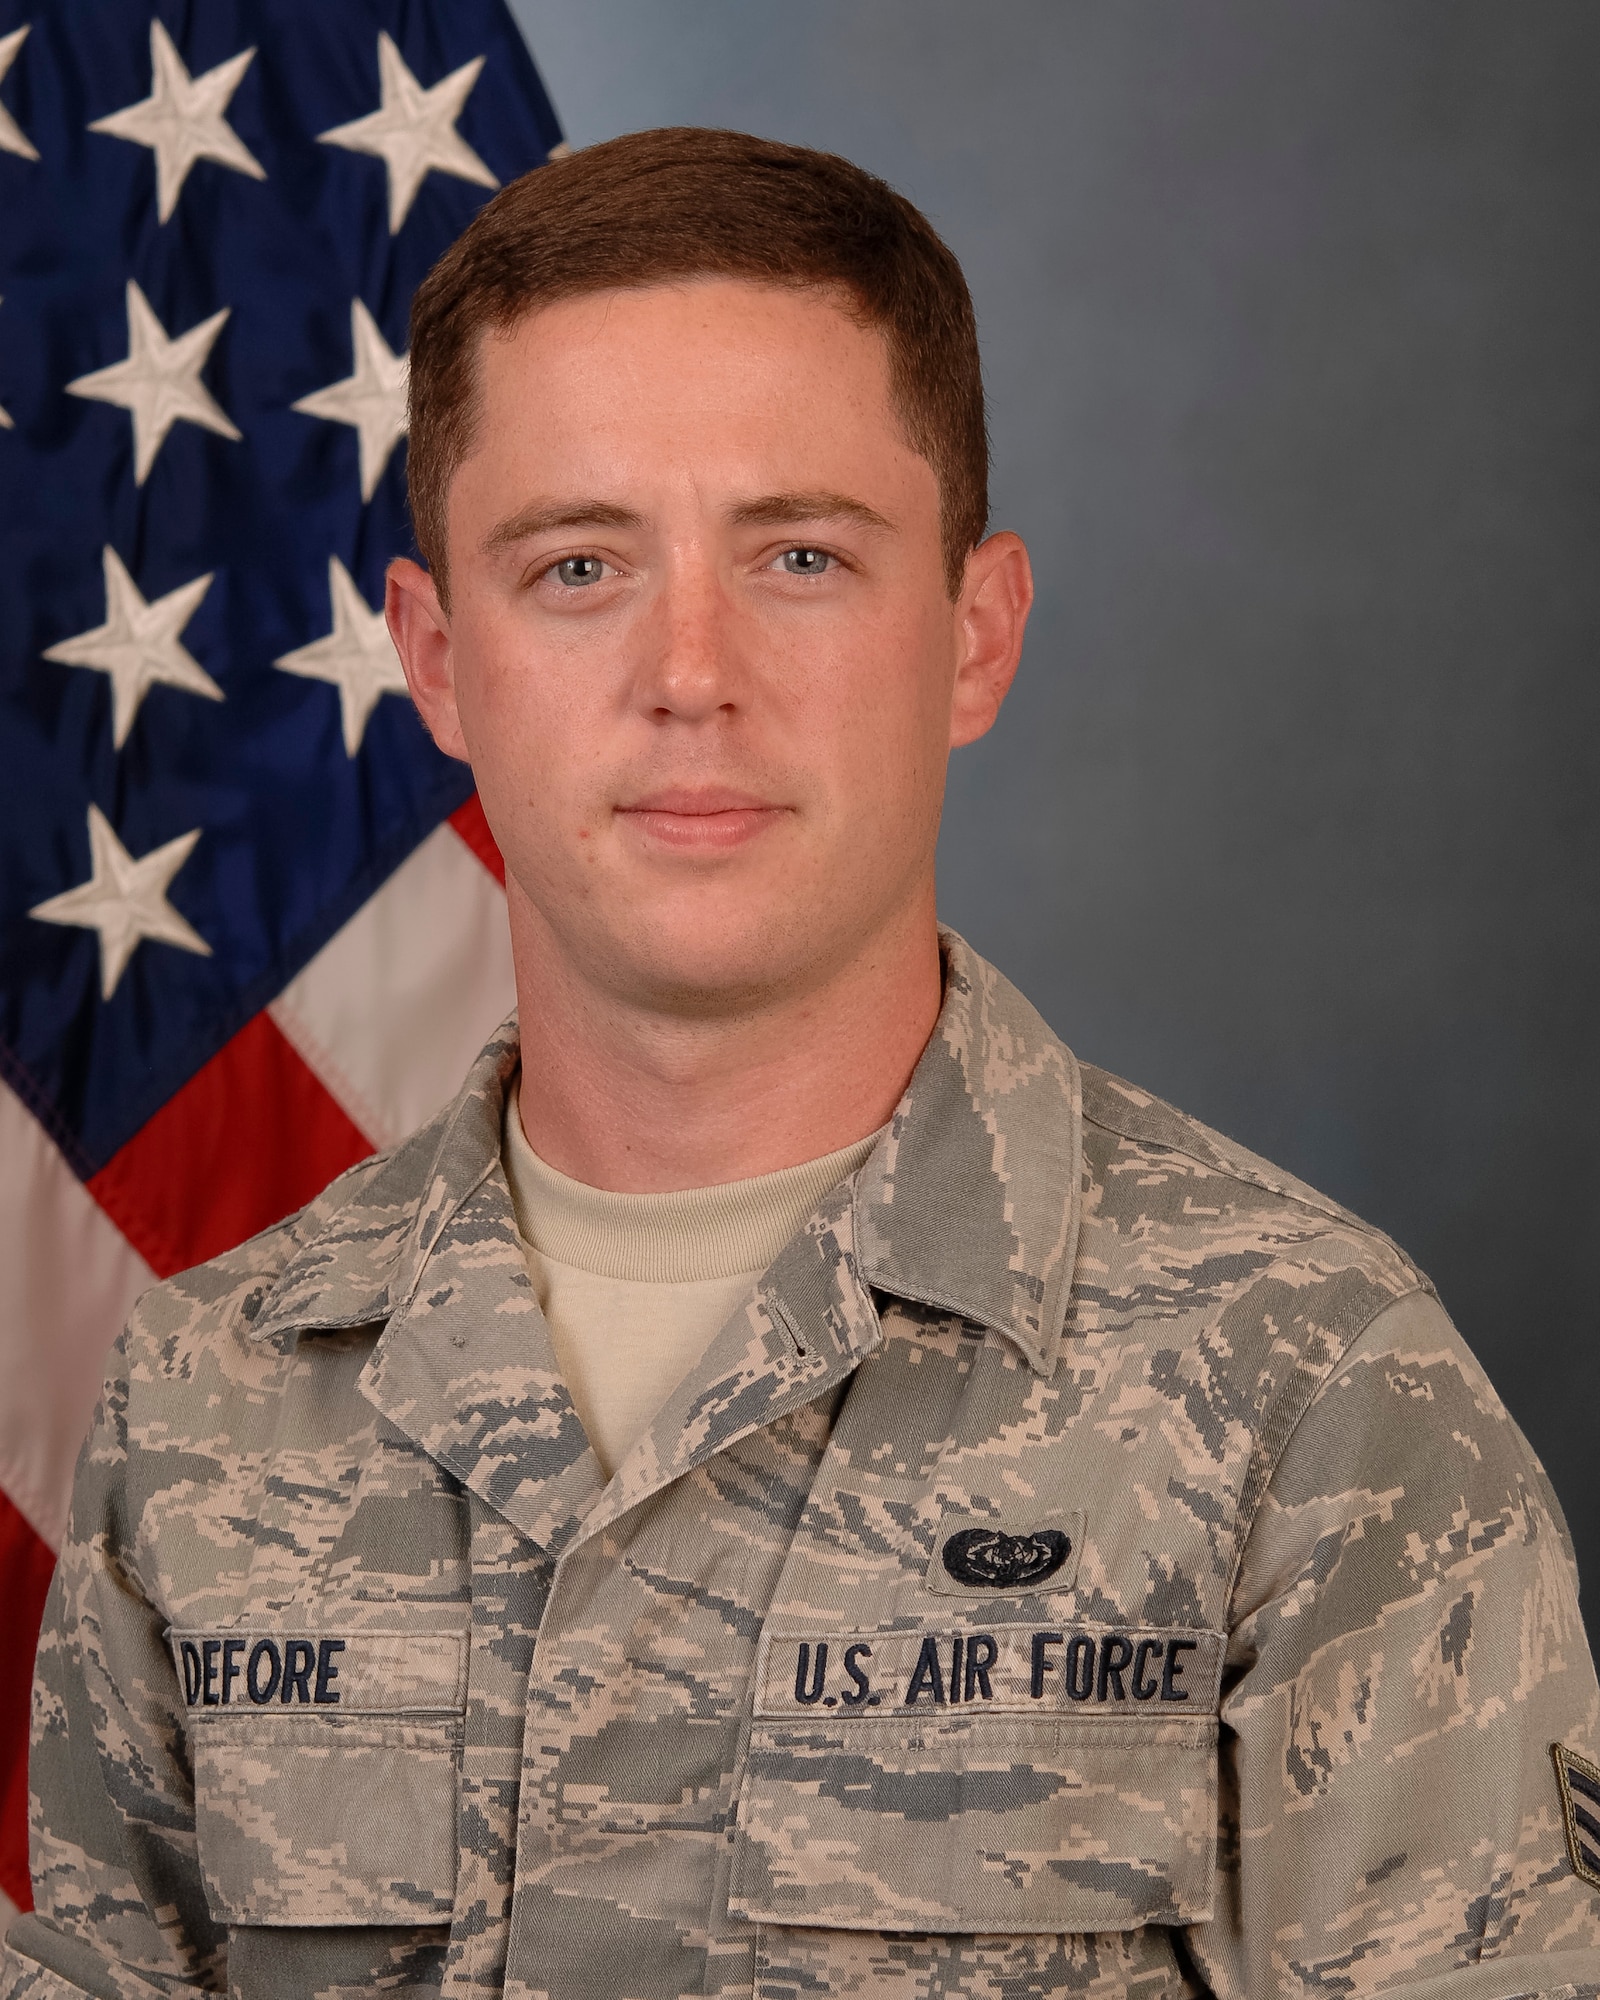 Senior Airman Joey DeFore, with the 116th Air Control Wing, poses for an official photo at Robins Air Force Base, Ga., Aug. 20, 2013.  DeFore along with two bystanders rescued six children from an overturned bus in Warner Robins, Ga., Aug. 15, 2013. The accident is currently under investigation.(U.S. National Guard photo by Tech. Sgt. Regina Young/released) 